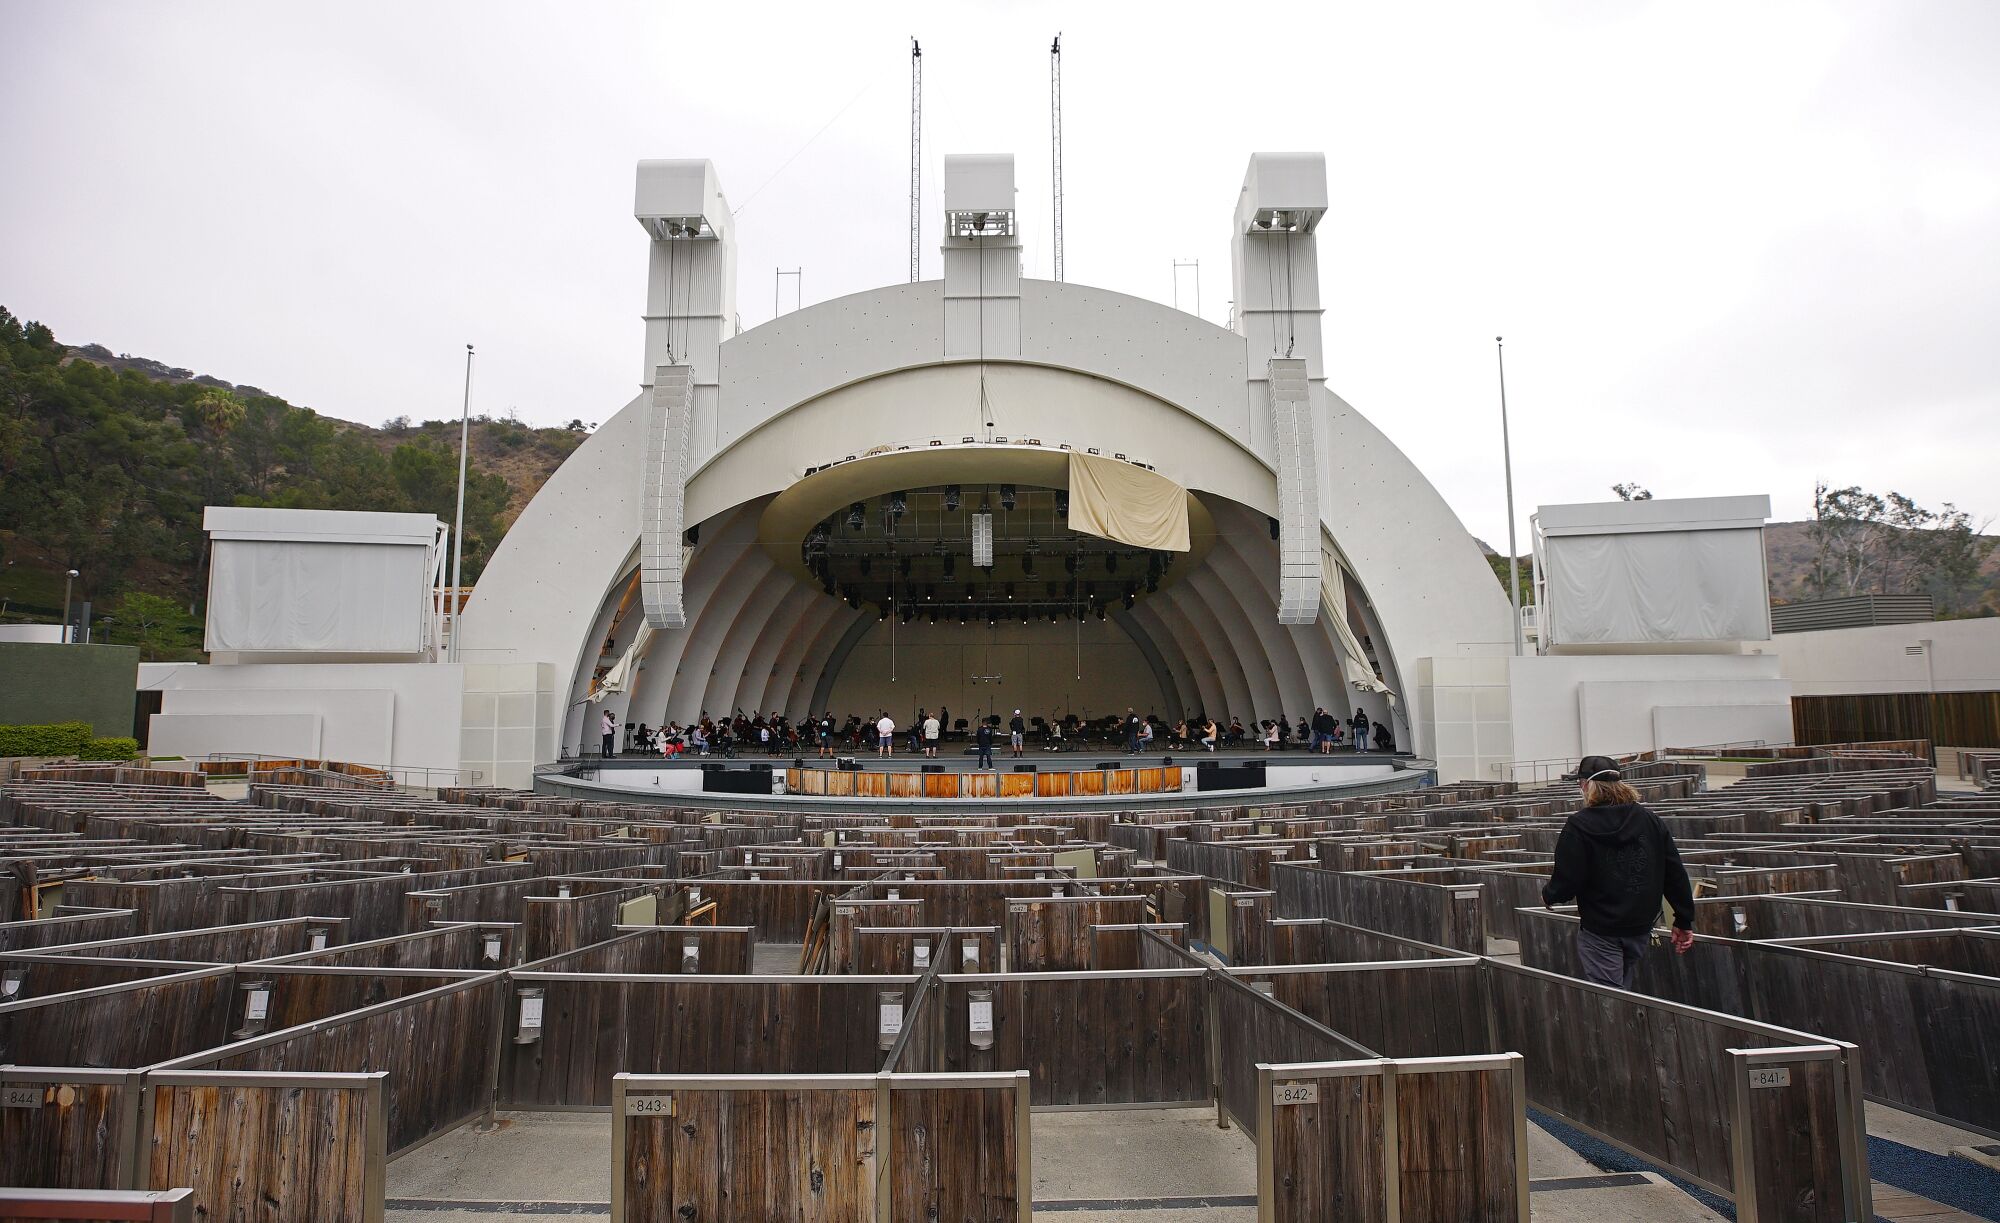 A wide view of the Hollywood Bowl